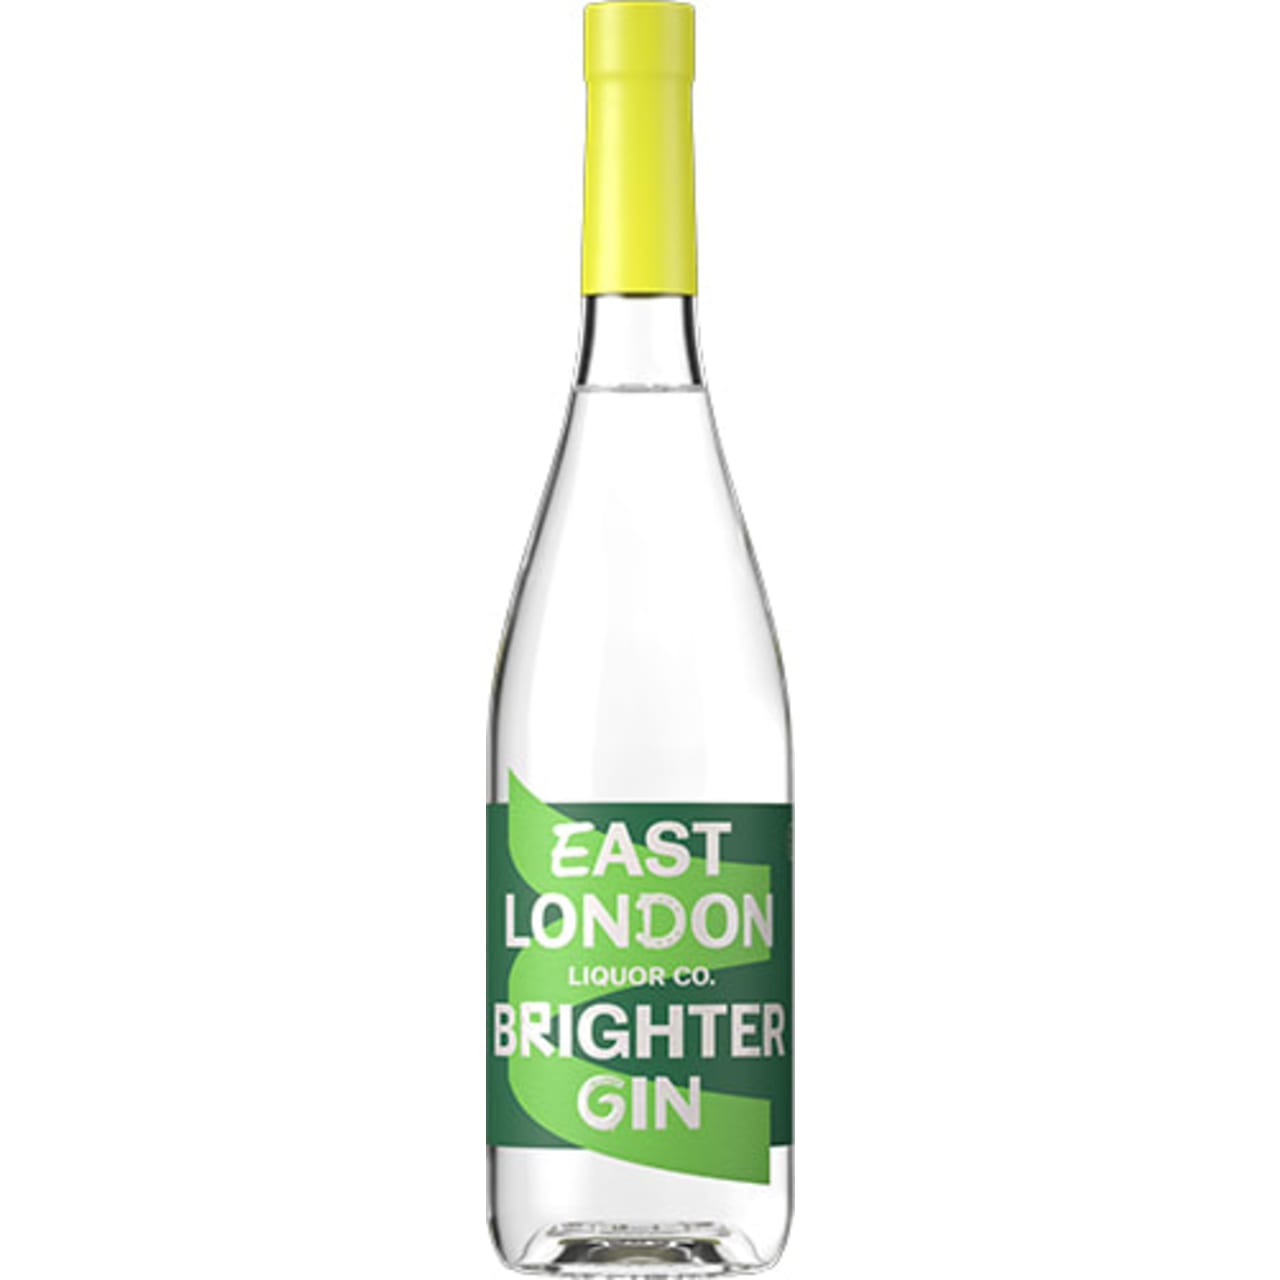 Product Image - East London Brighter Gin